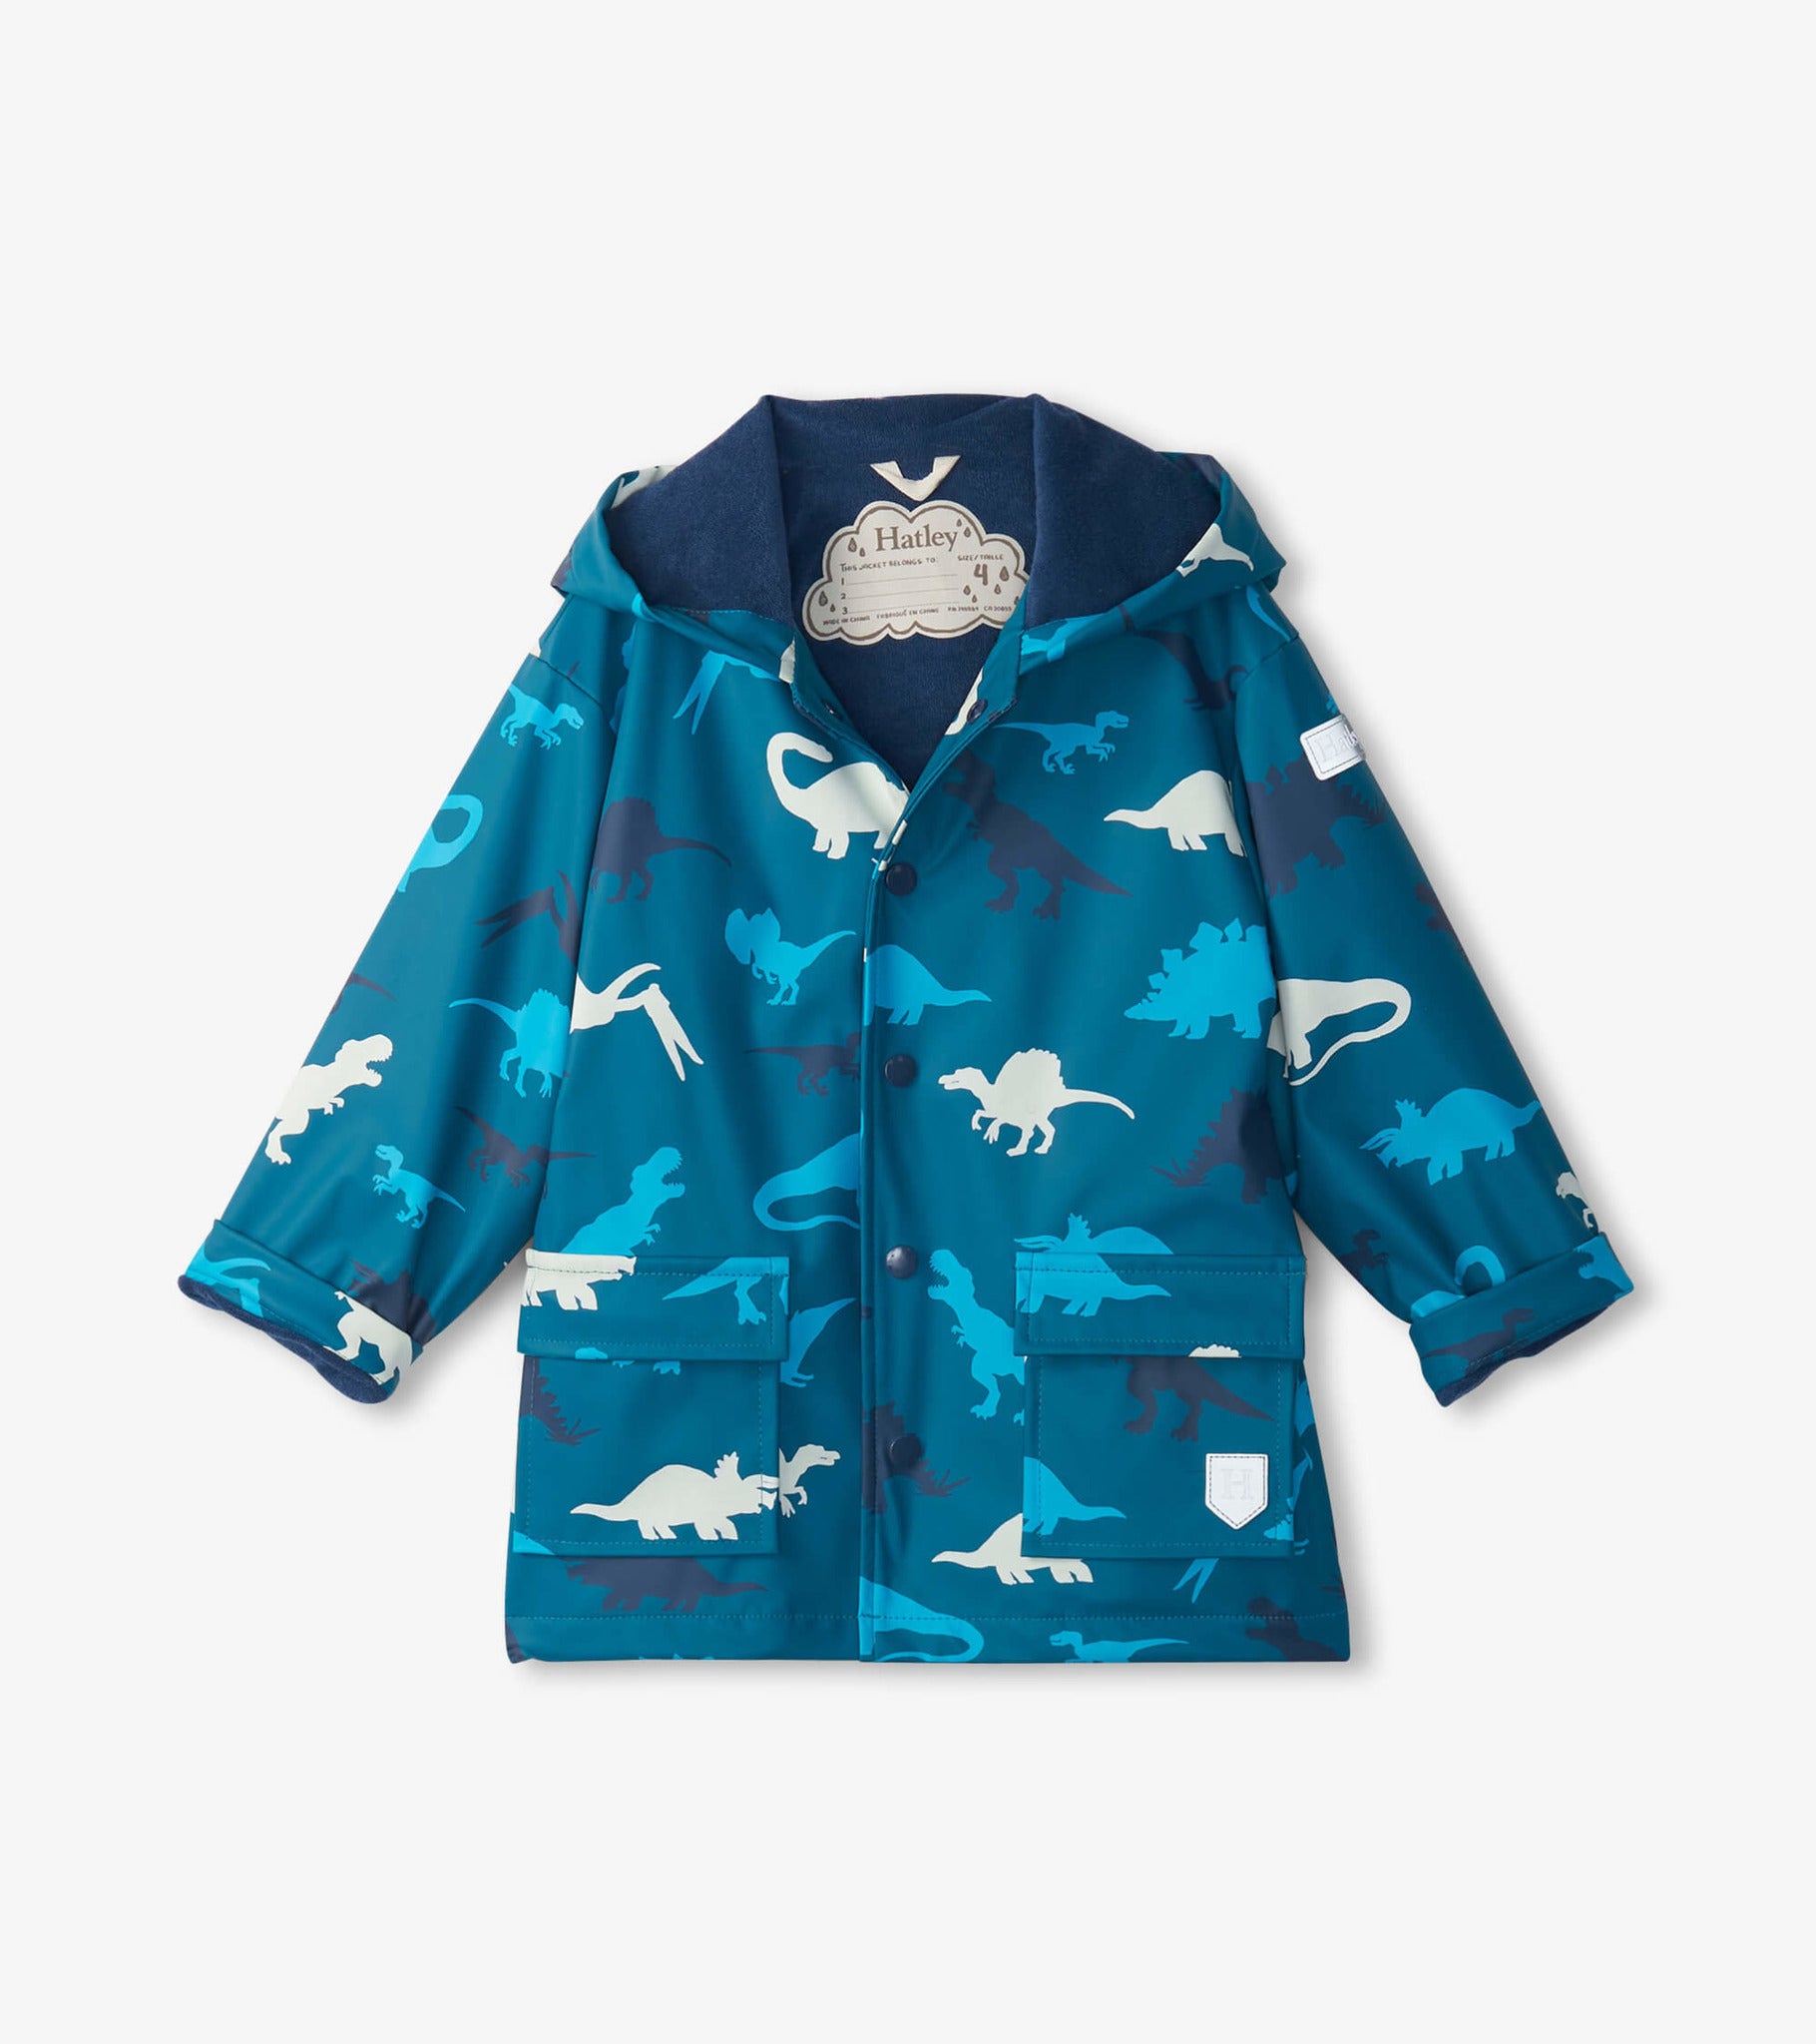 Hatley Real Dinosaurs Colour Changing Kids Raincoat - Moroccan Blue